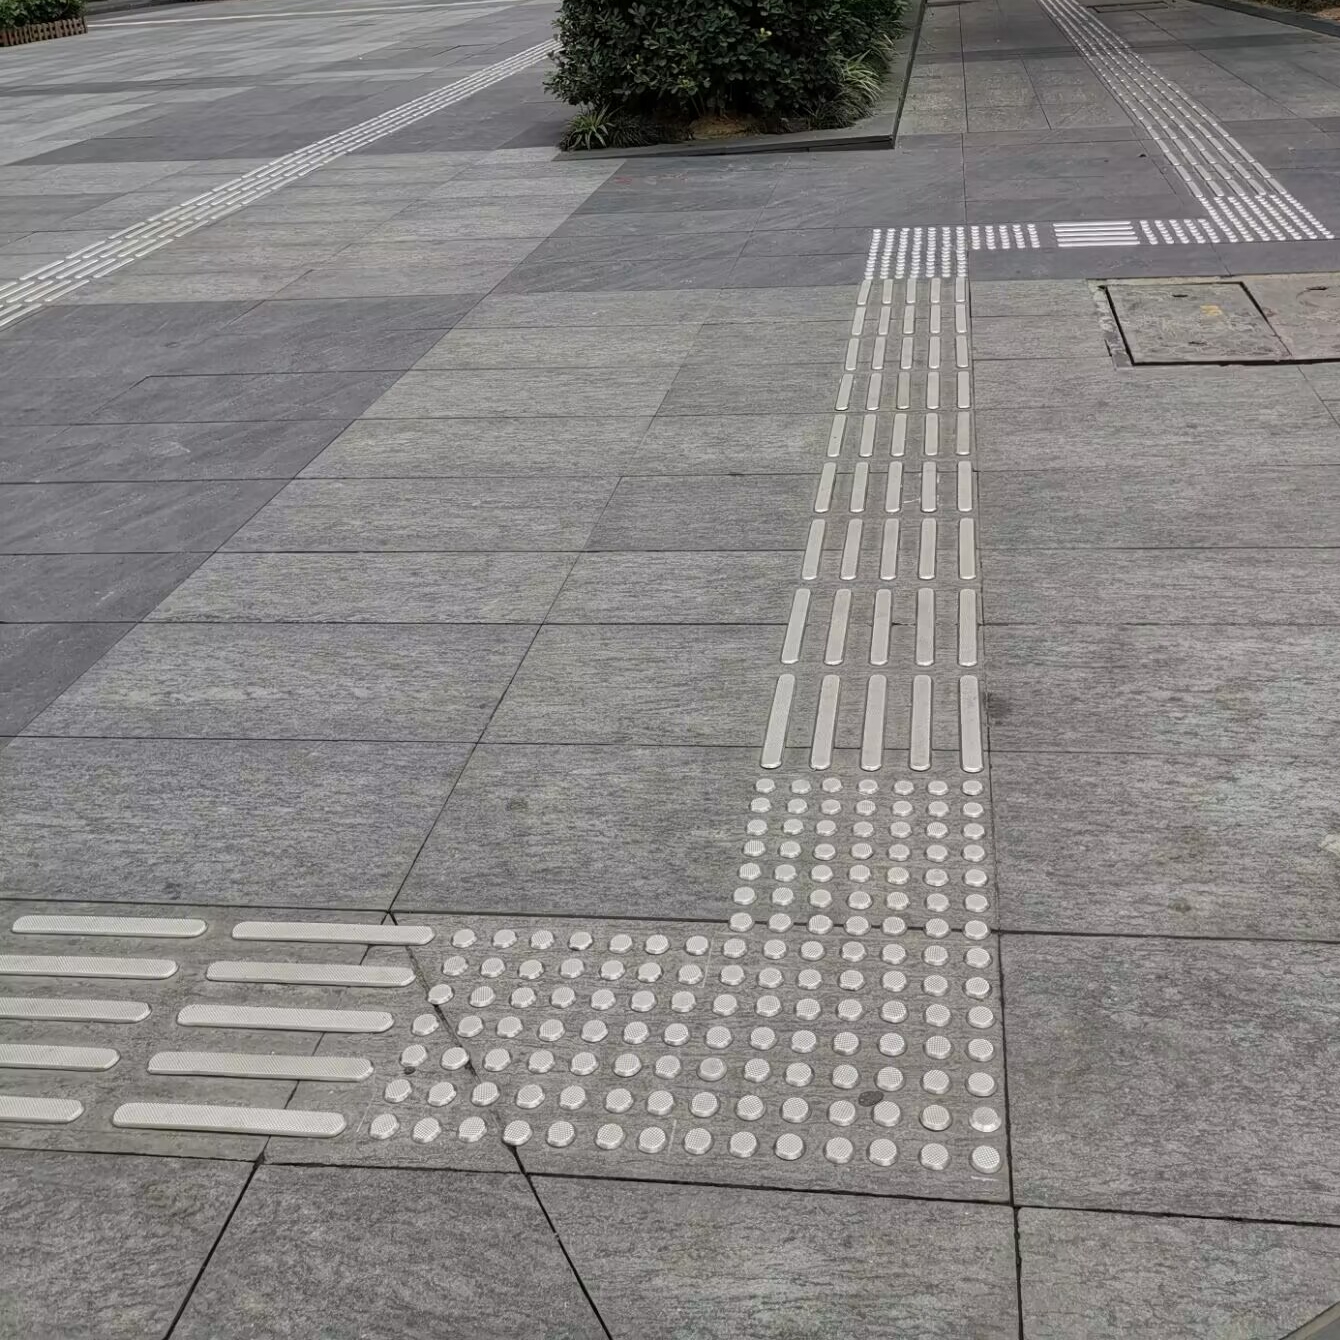 Tactile Tile Paving Floor Classification: Improving Accessibility and Safety for All